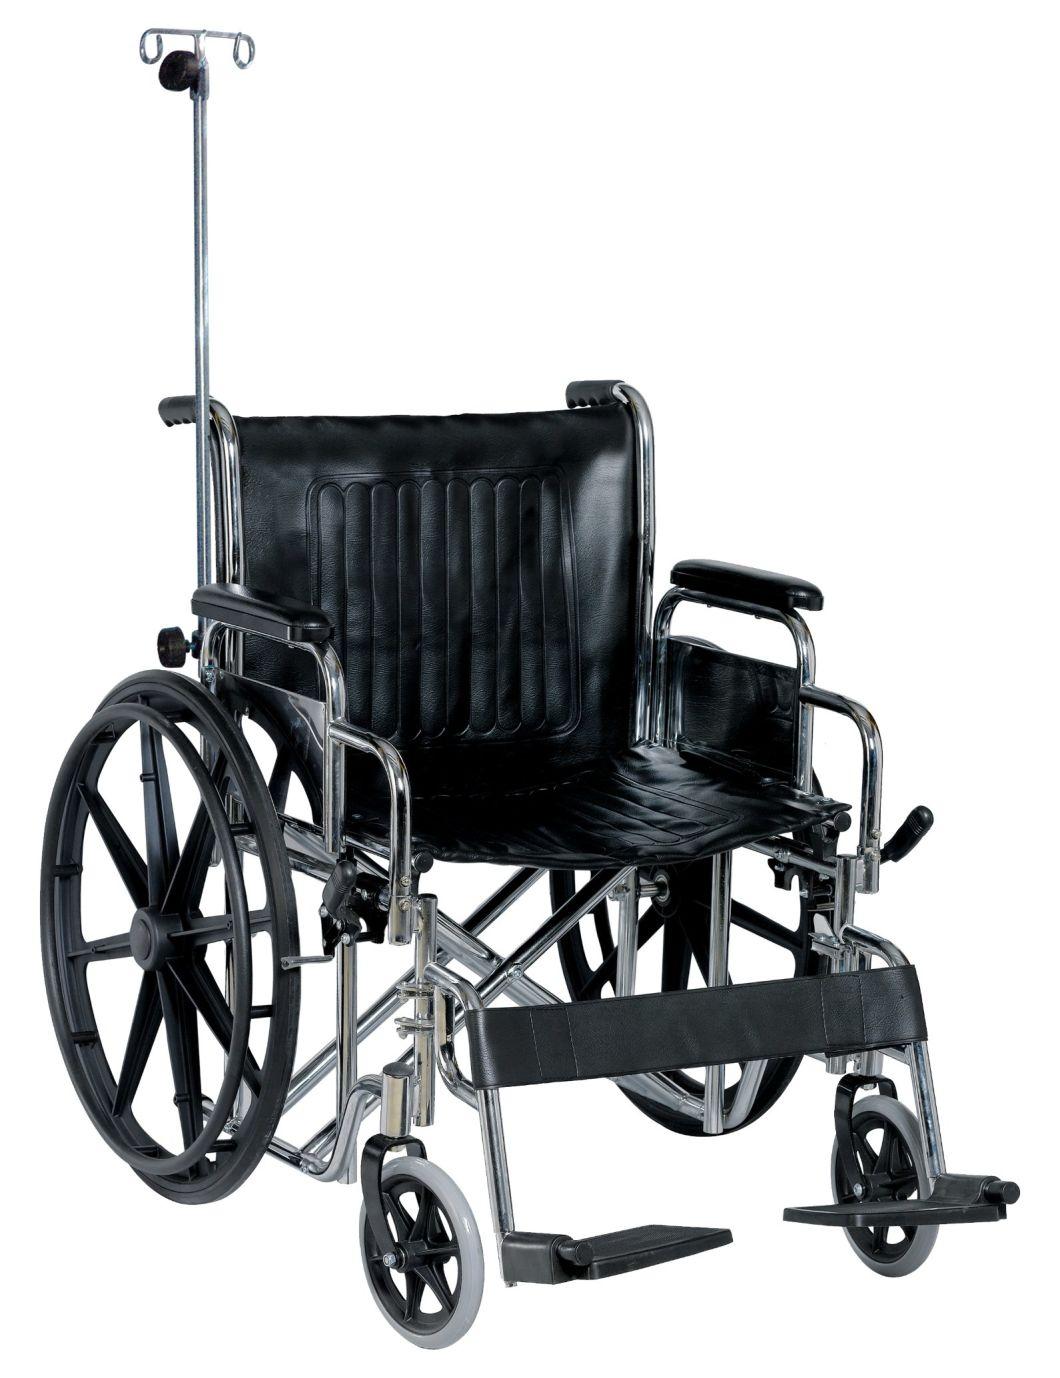 Patient Transfer Sport Manual Wheelchair Stand up for Disabled People